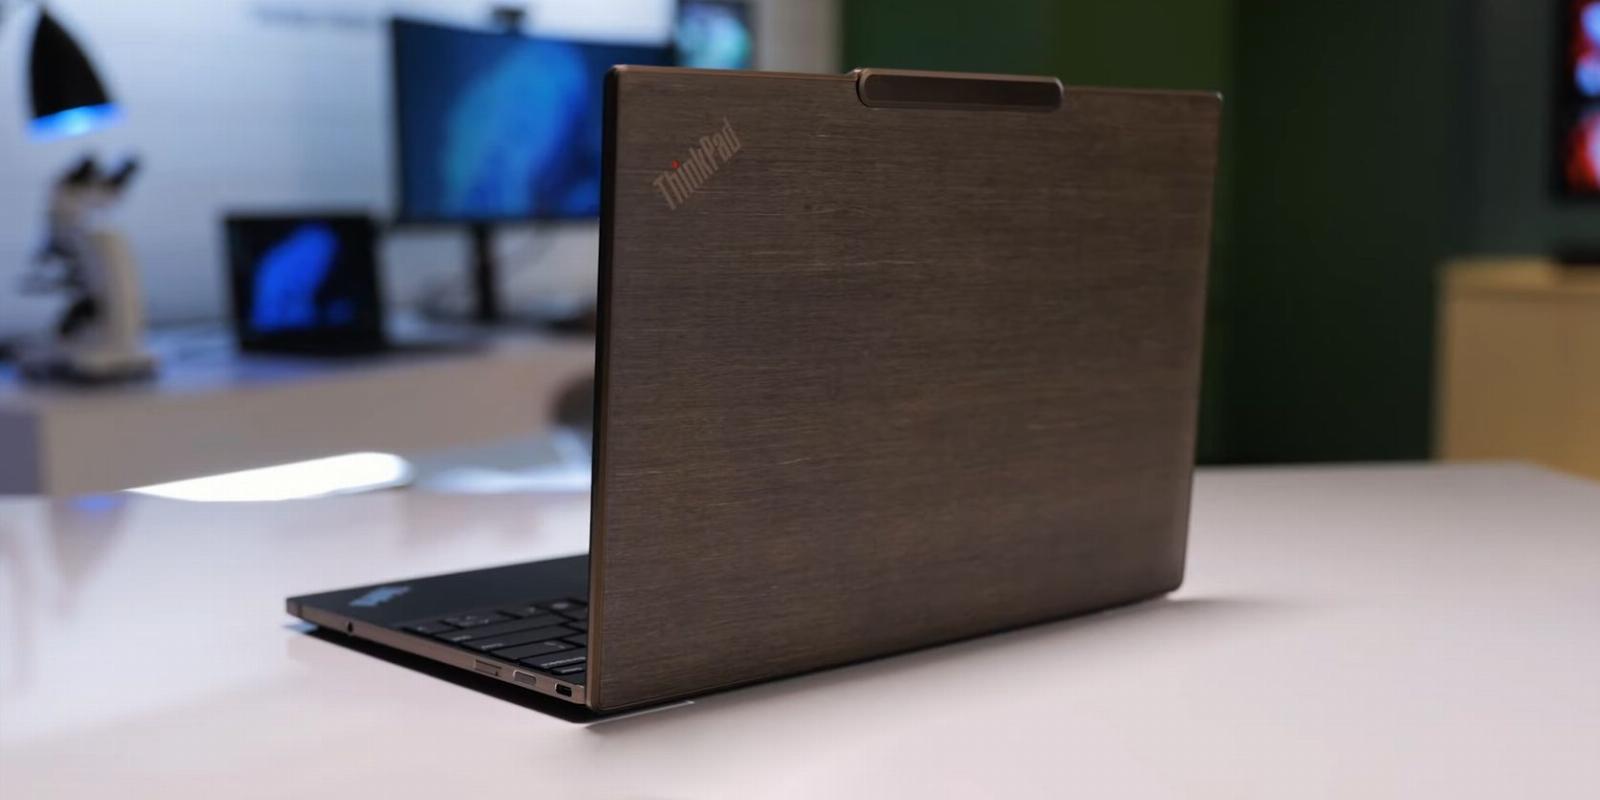 Lenovo Launches the ThinkPad Z Series Gen 2 for Hybrid Work at MWC 2023